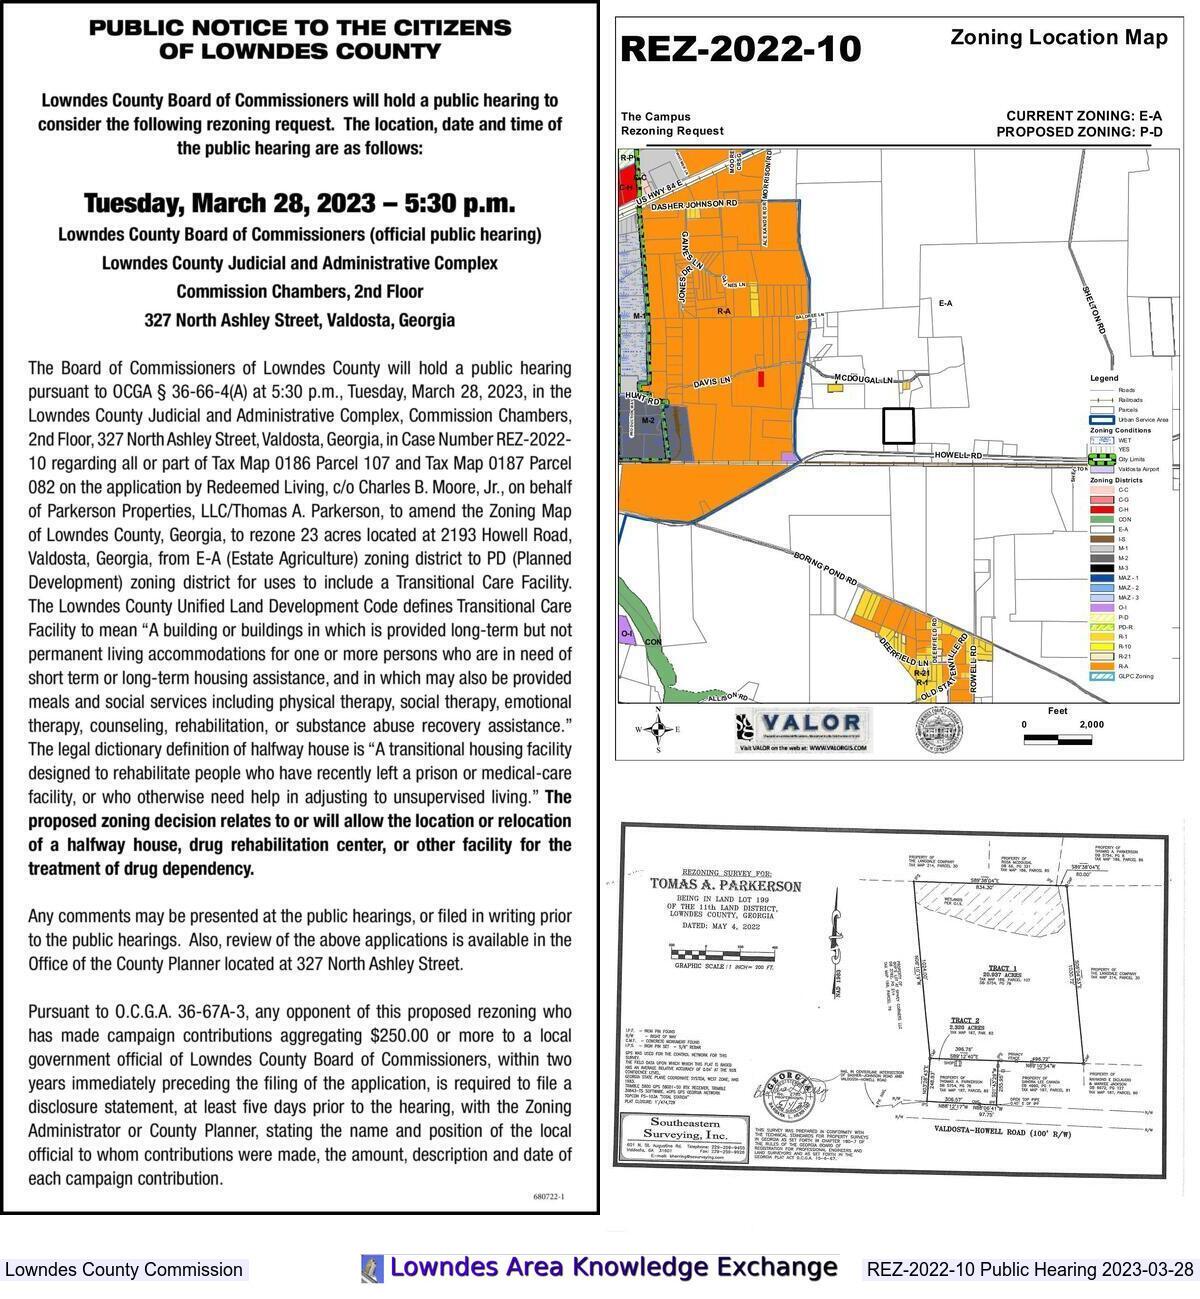 [Second Public Re-Hearing, Zoning Location Map]